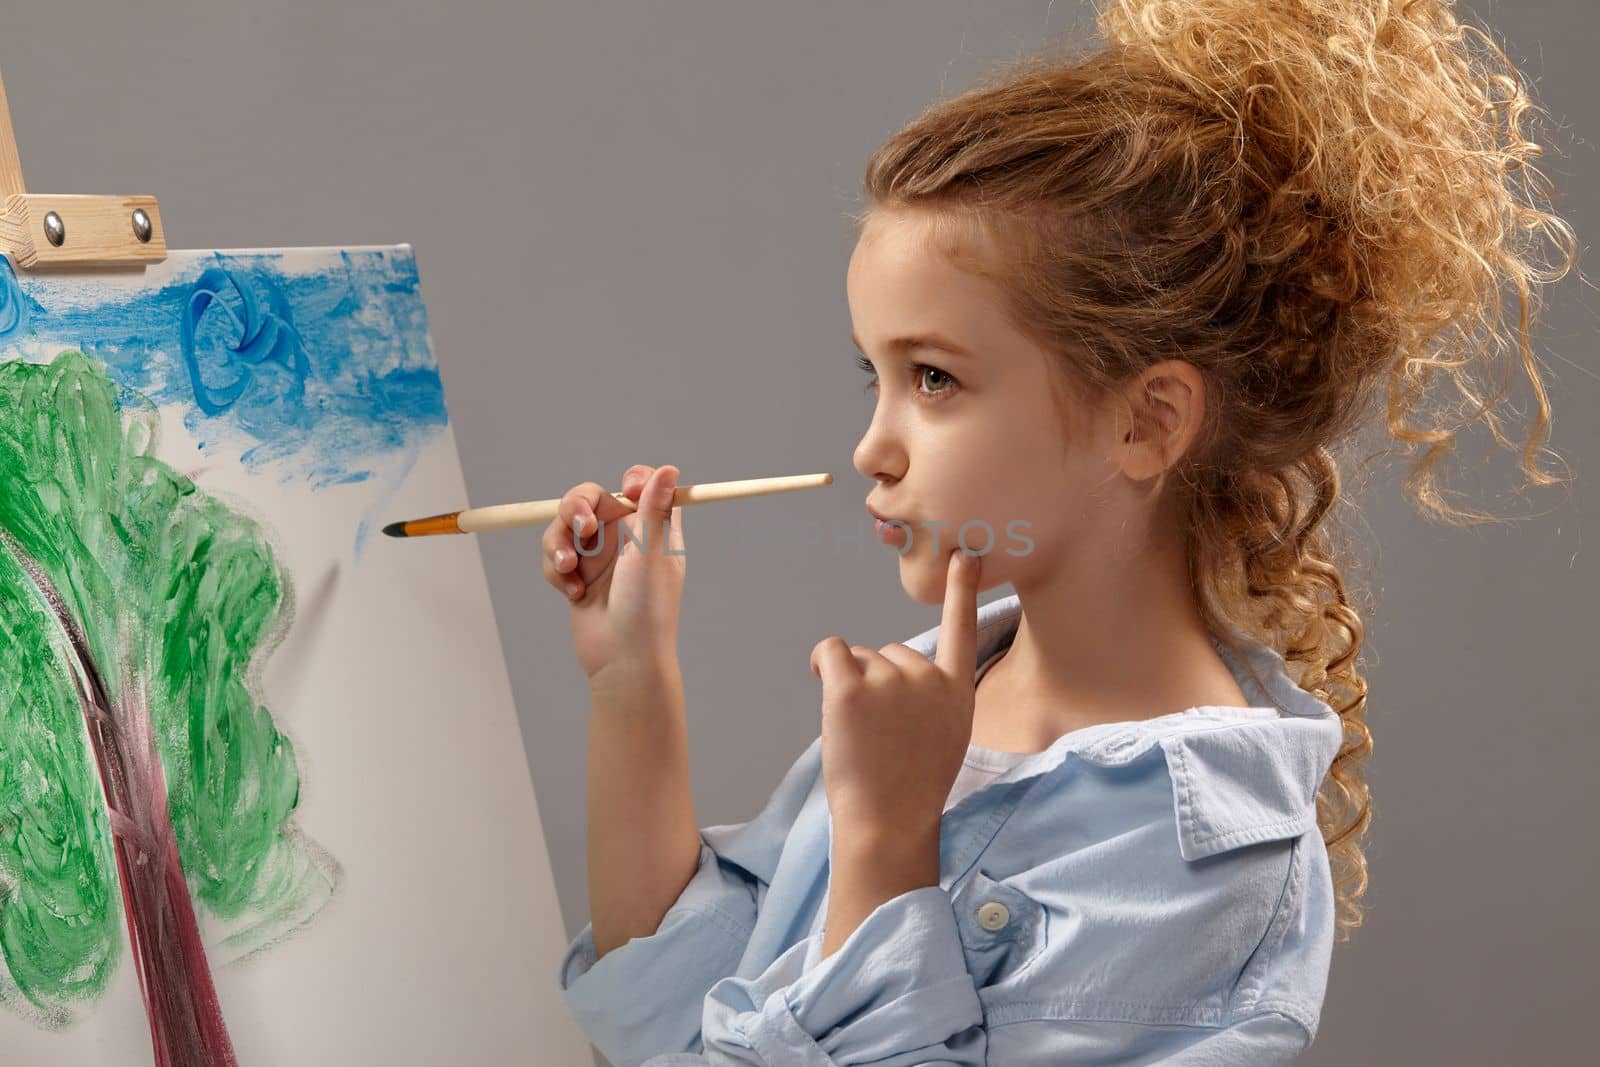 Thoughtful school girl whith a curly hair, wearing in a blue shirt and white t-shirt is painting with a watercolor brush on an easel, standing on a gray background.